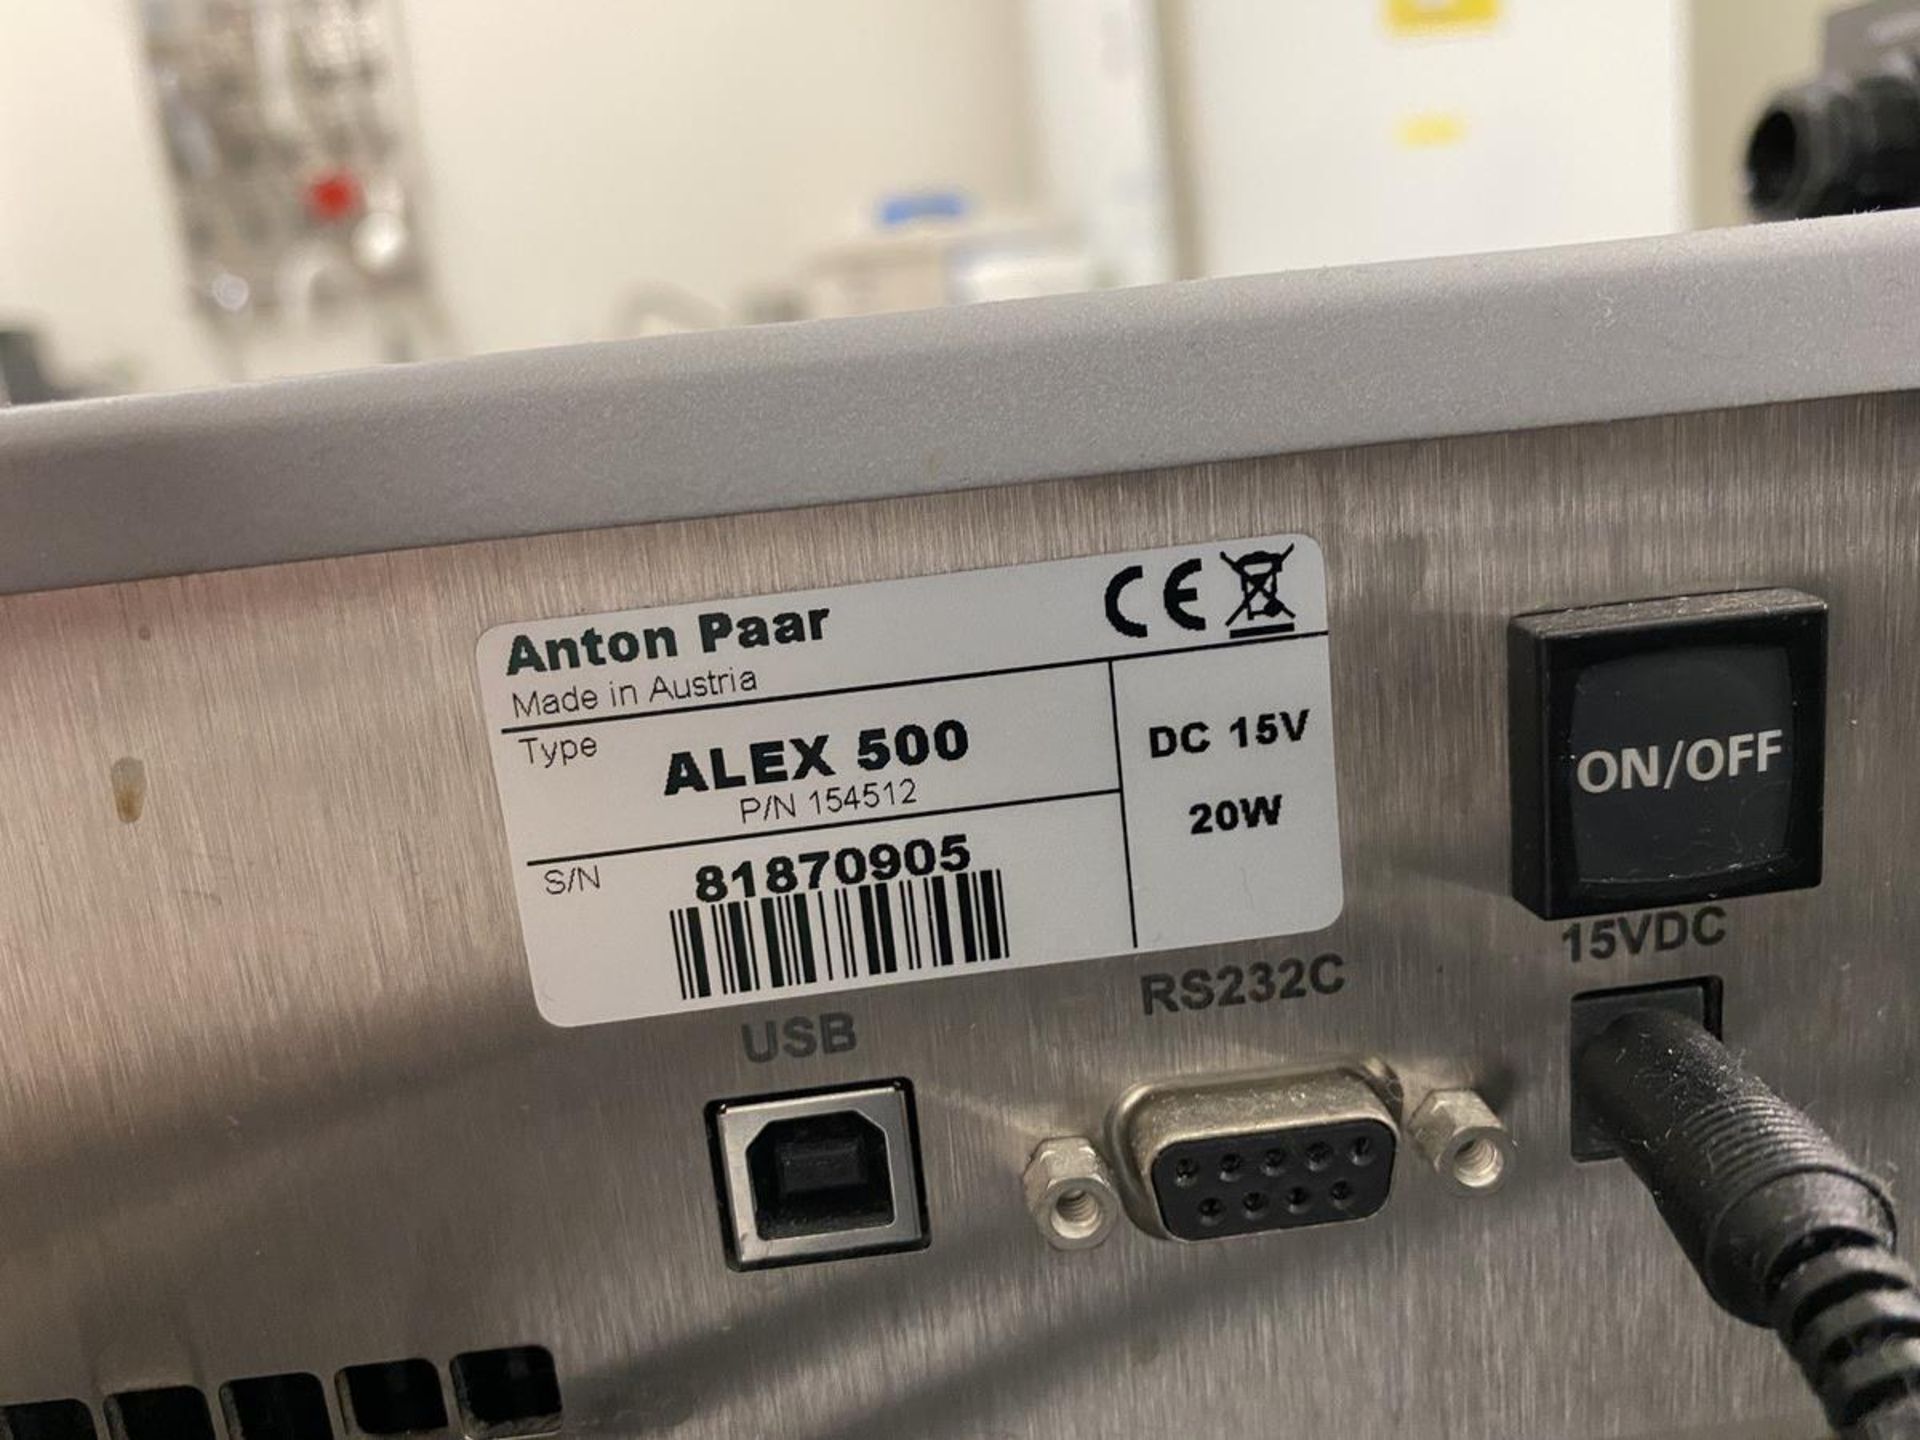 Anton Paar Alex 500 Alcohol and Extract Meter s/n 81870905 | Rig Fee: $250 or HC - Image 3 of 3